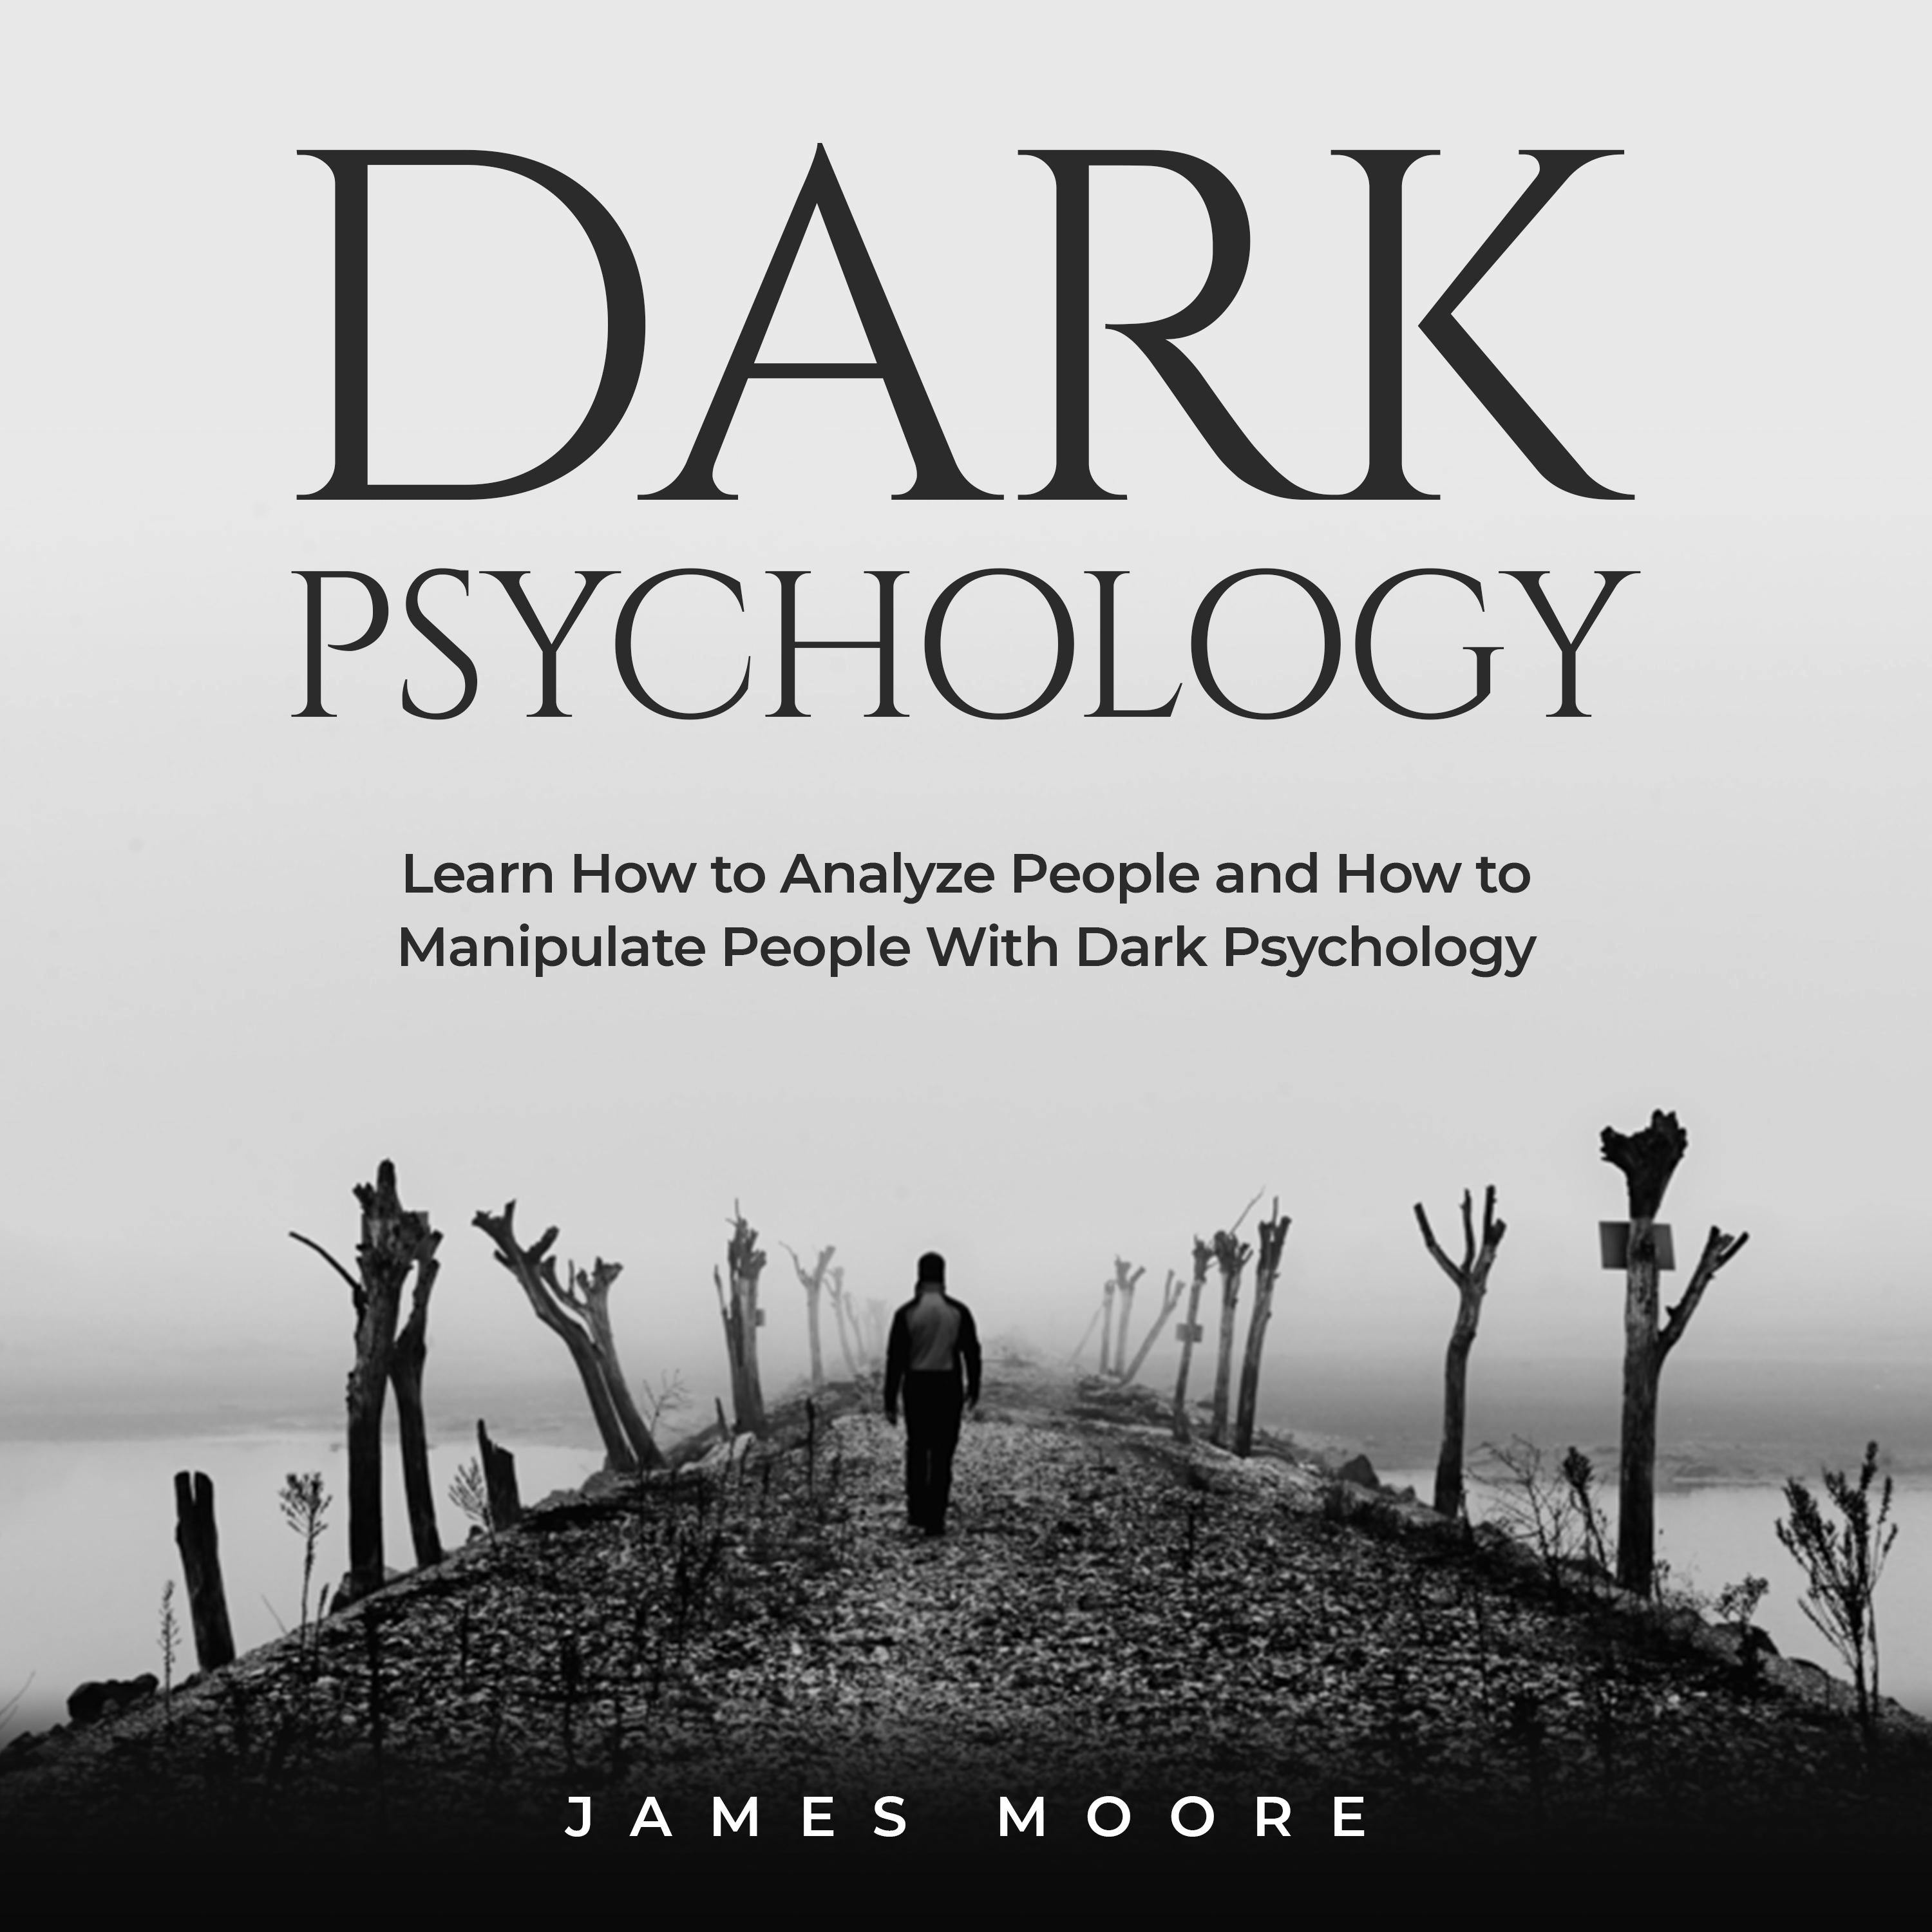 Dark Psychology: Learn How to Analyze People and How to Manipulate People with Dark Psychology - James Moore